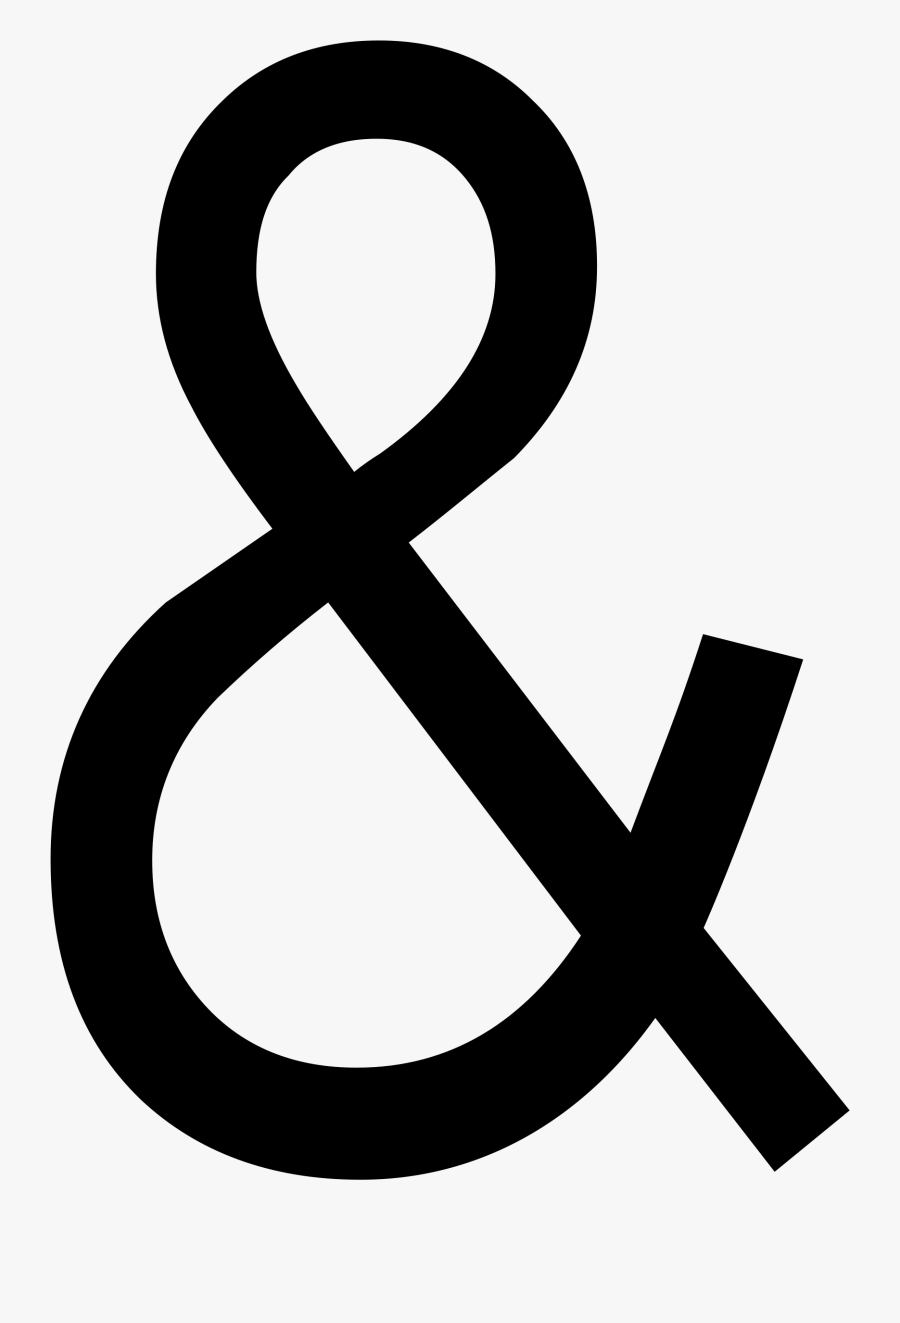 Ampersand Clipart Black And White - Ampersand Clip Art Free, Transparent Clipart